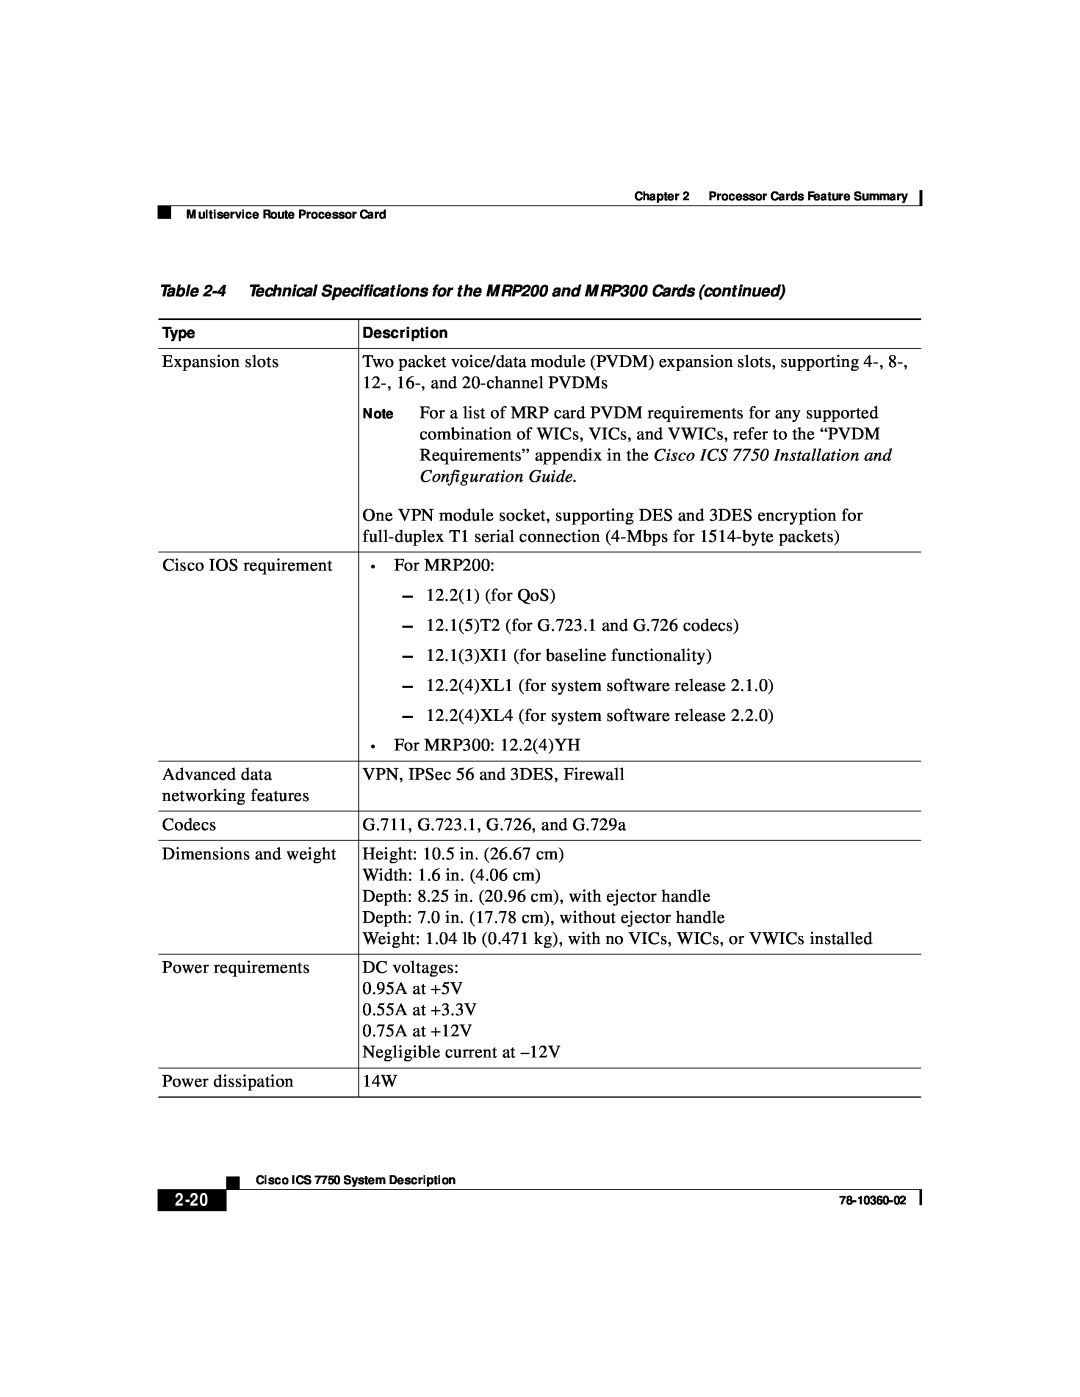 Cisco Systems ICS-7750 manual Requirements” appendix in the Cisco ICS 7750 Installation and, Configuration Guide, 2-20 